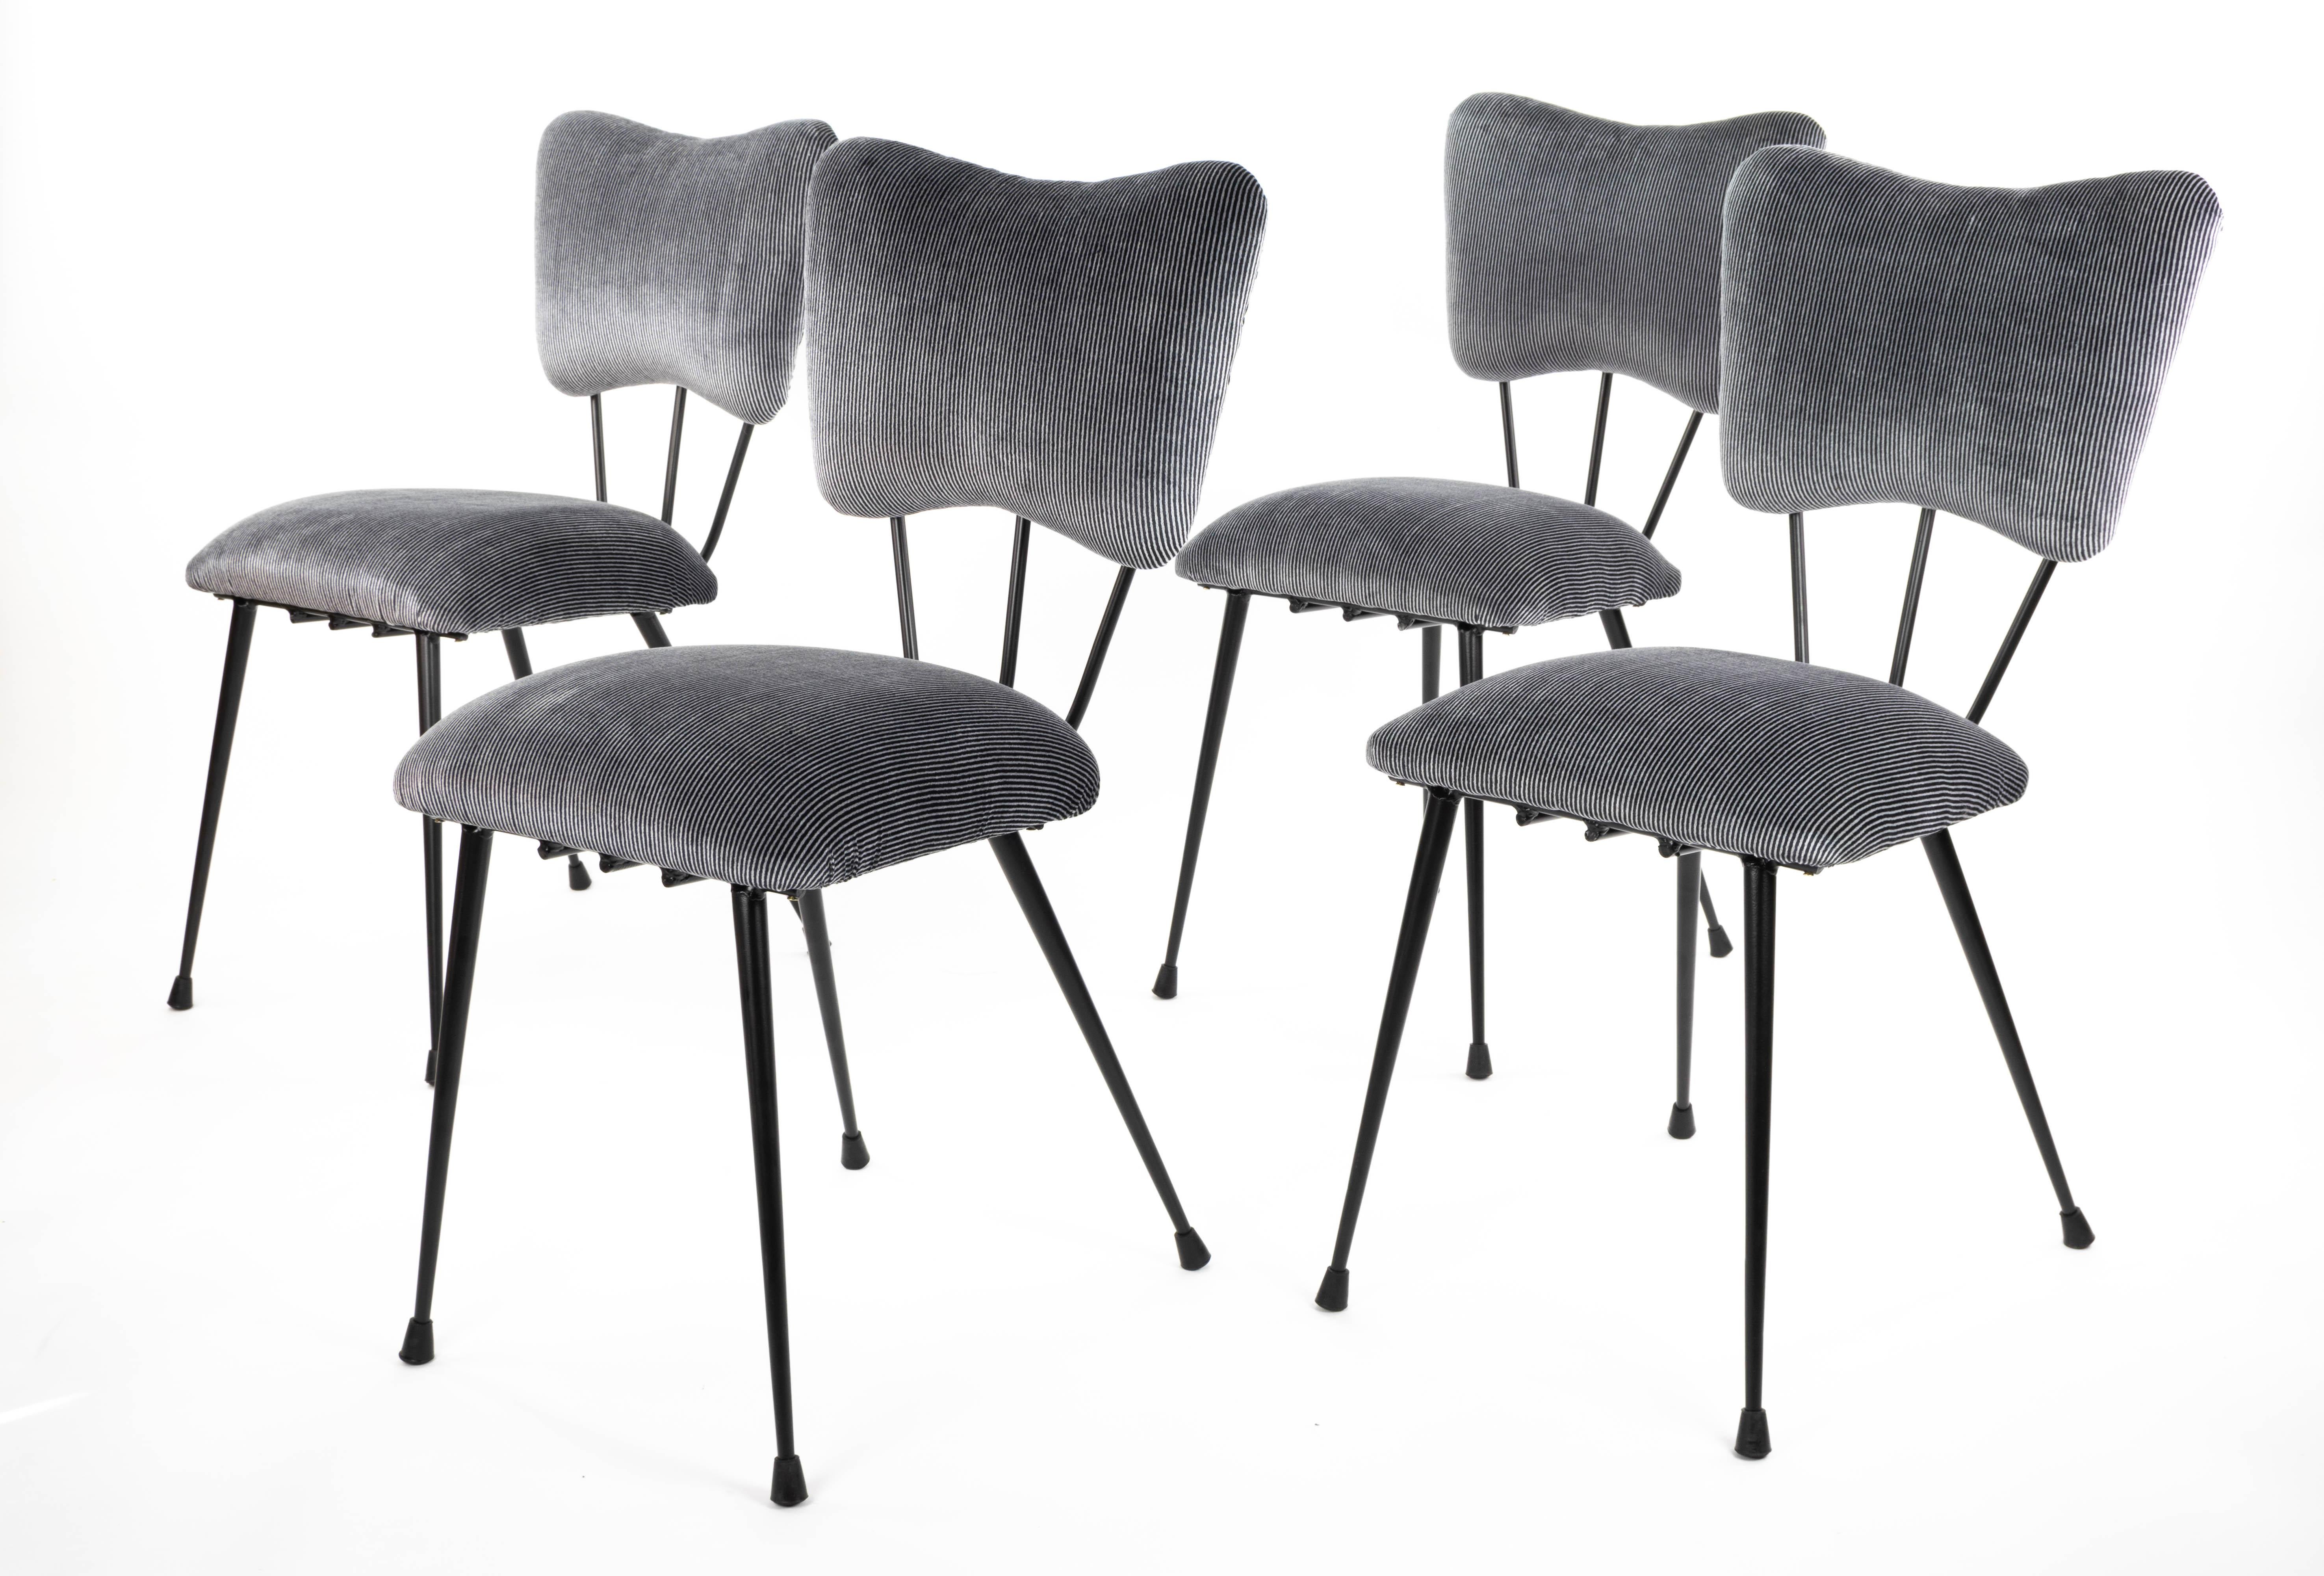 Mid-Century Modern Midcentury French Chairs in Black Lacquered Steel and Striped Upholstery, 1950s